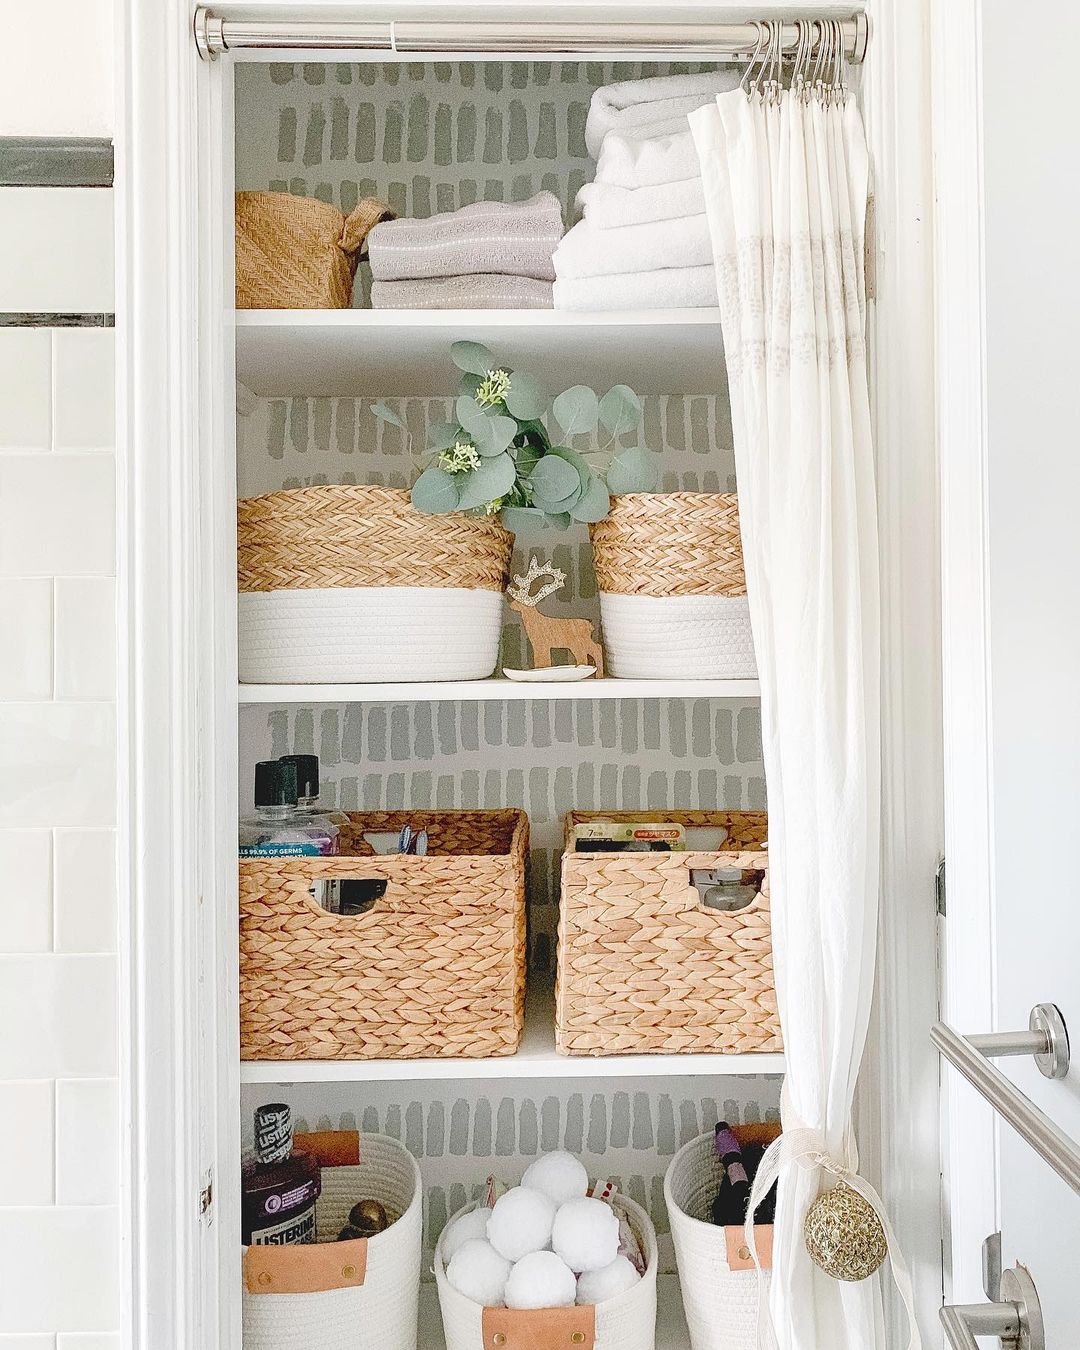 Linen closet in a bathroom featuring woven baskets to store various bathroom supplies, including towels, mouthwash, and other various objects not seen. Photo by Instagram user @lbowhome.